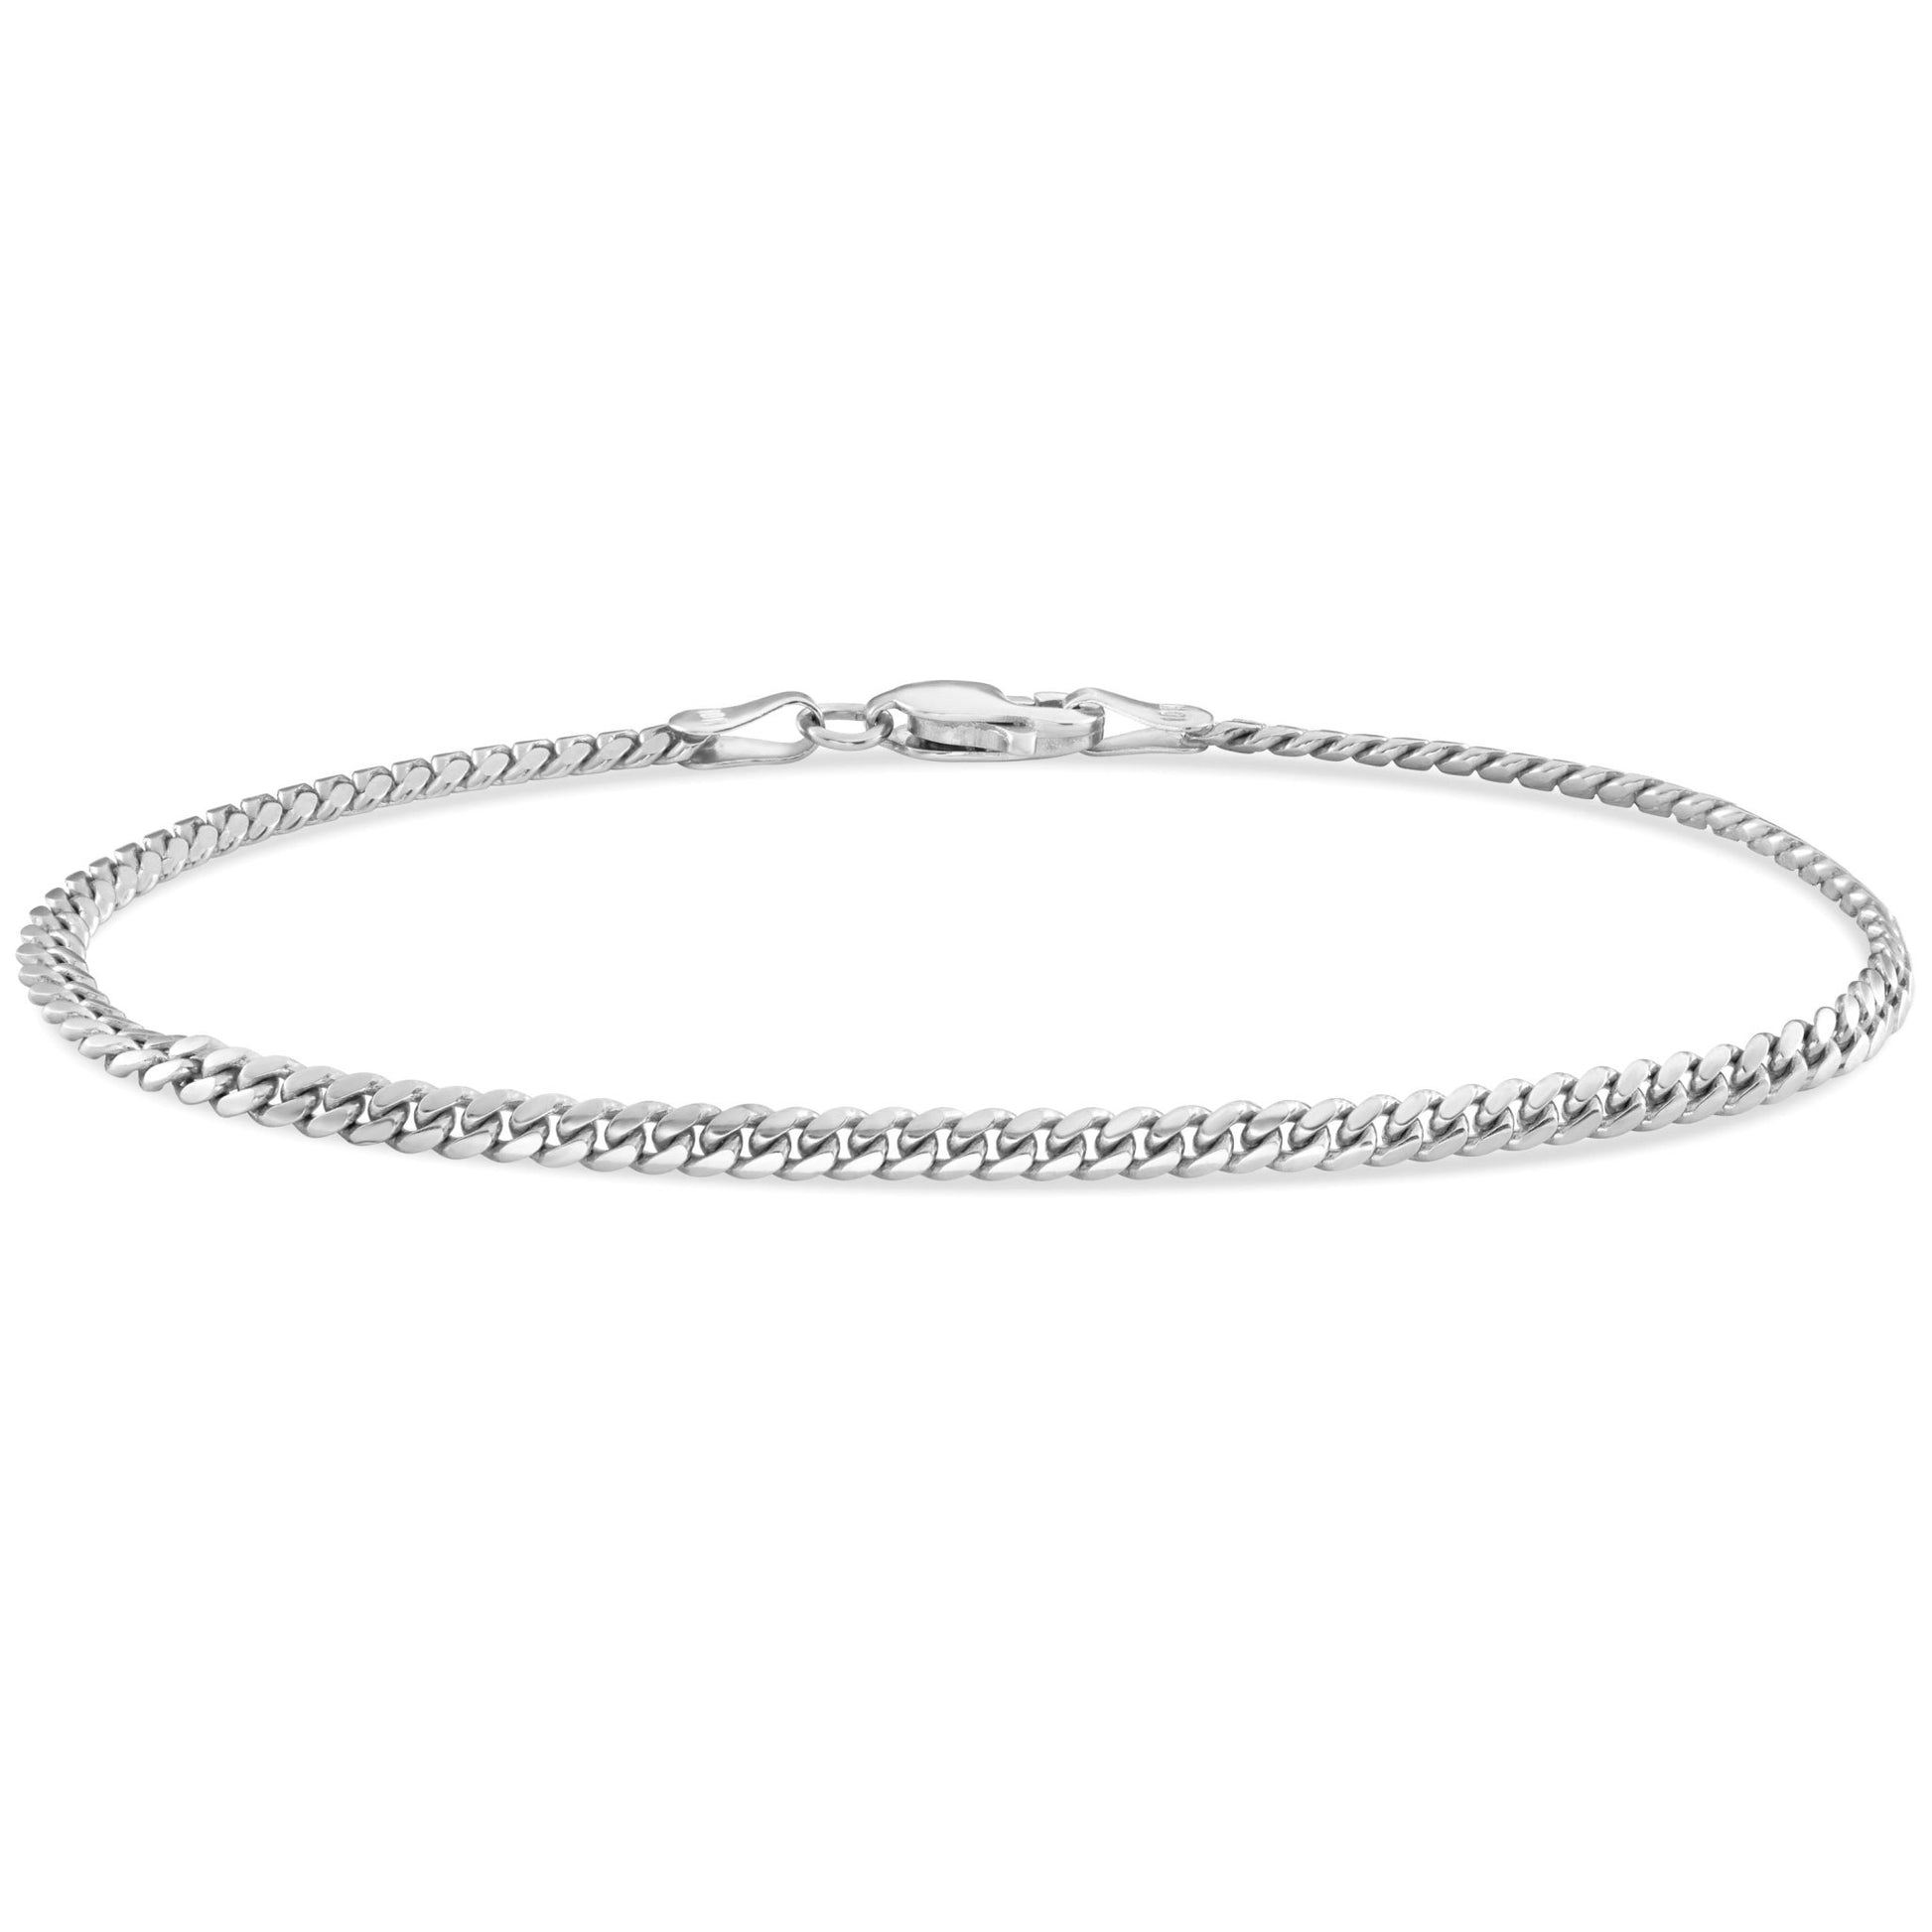 Oval Cuban Bracelet with Lobster Clasp